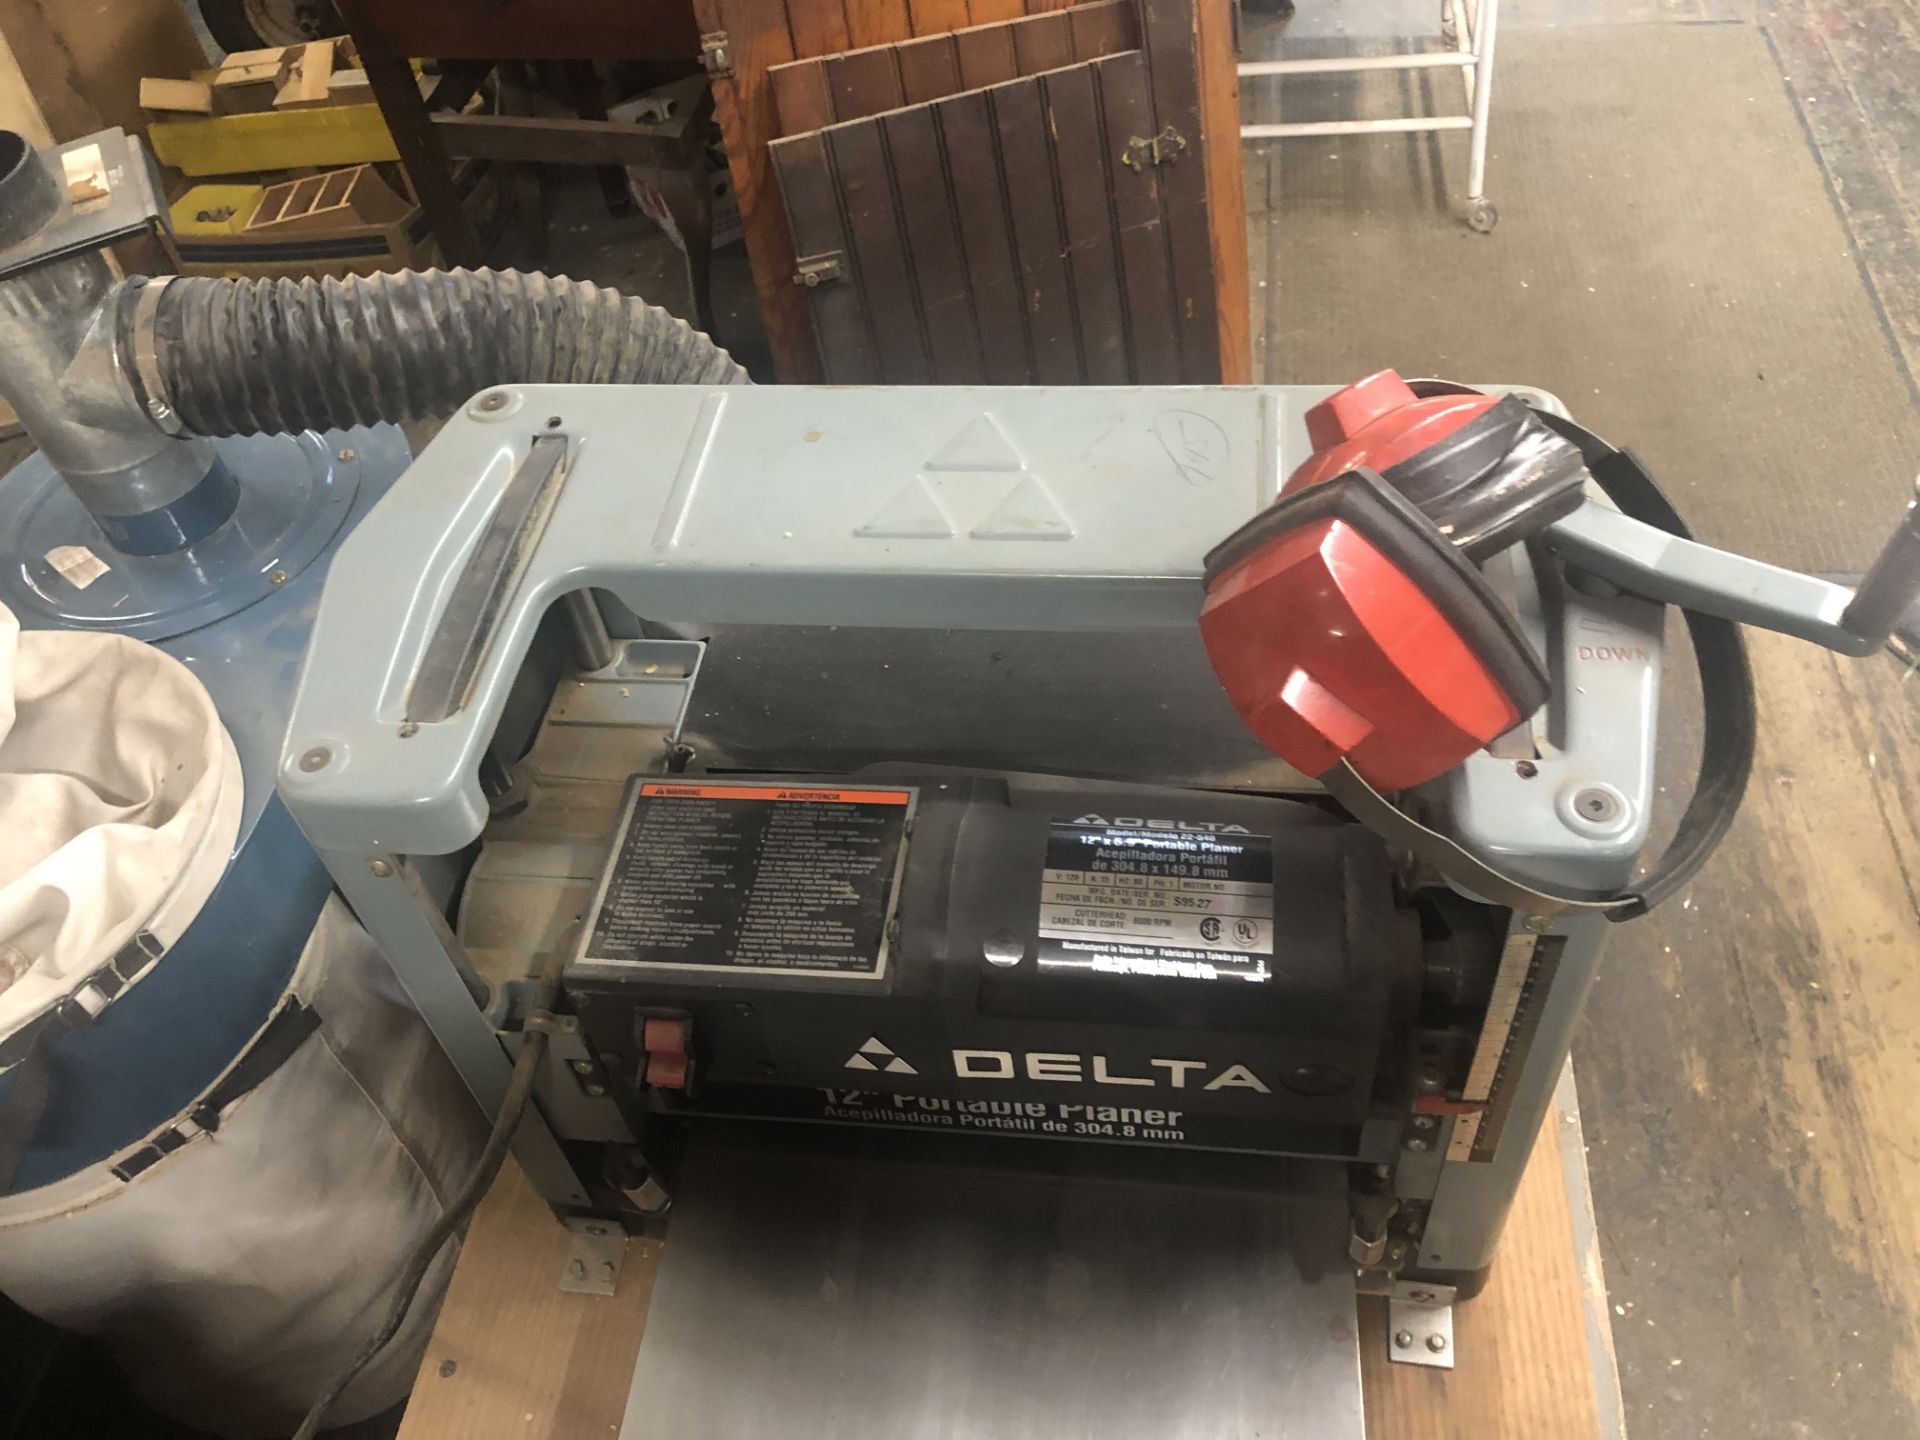 Delta 12" @22-1240 Portable Benchtop Planer w/Stand